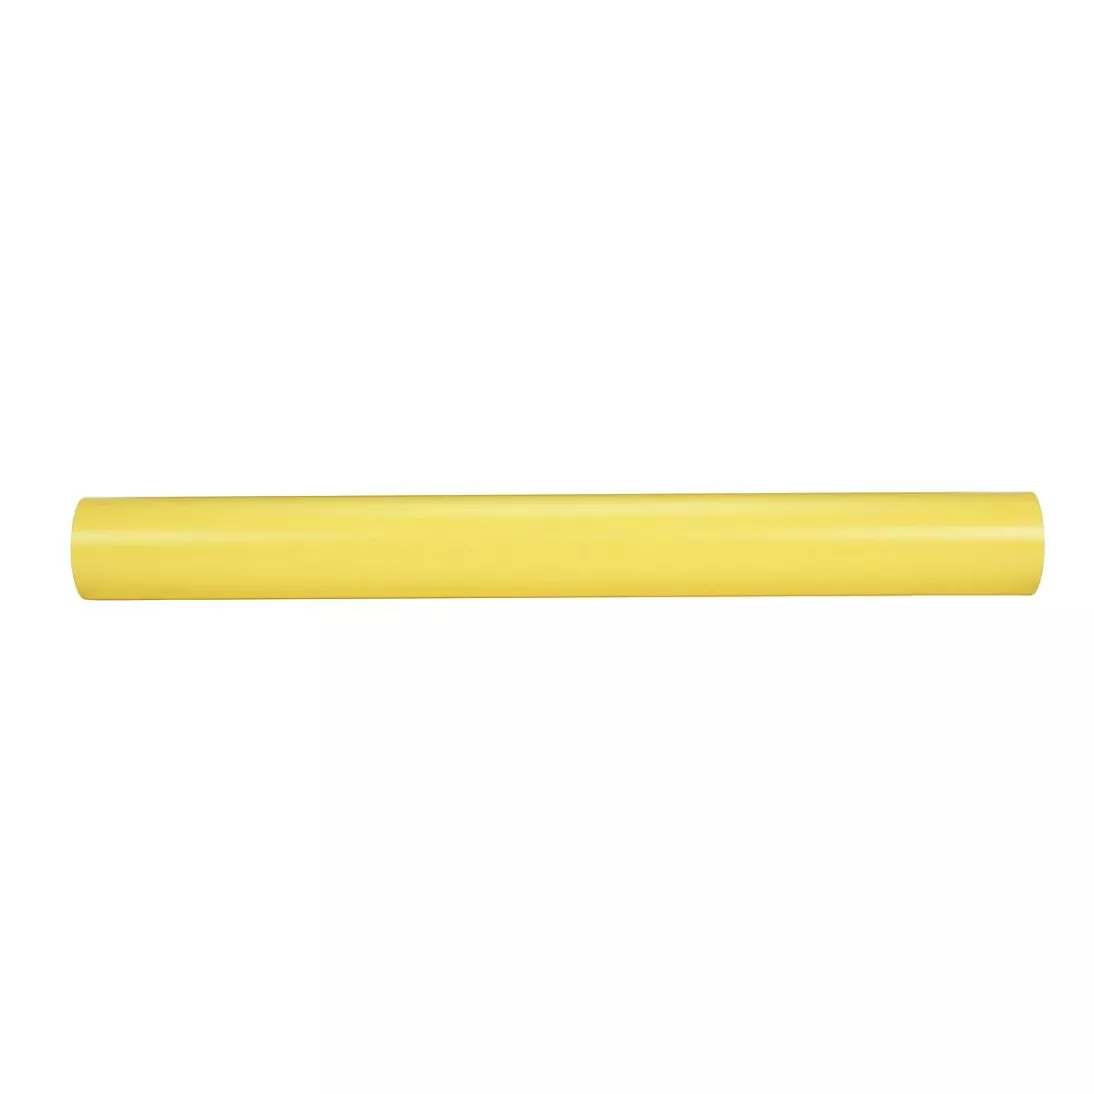 3M™ Cushion-Mount™ Plus Plate Mounting Tape E1315H, Yellow, 54 in x 25
yd, 15 mil, 1 roll per case